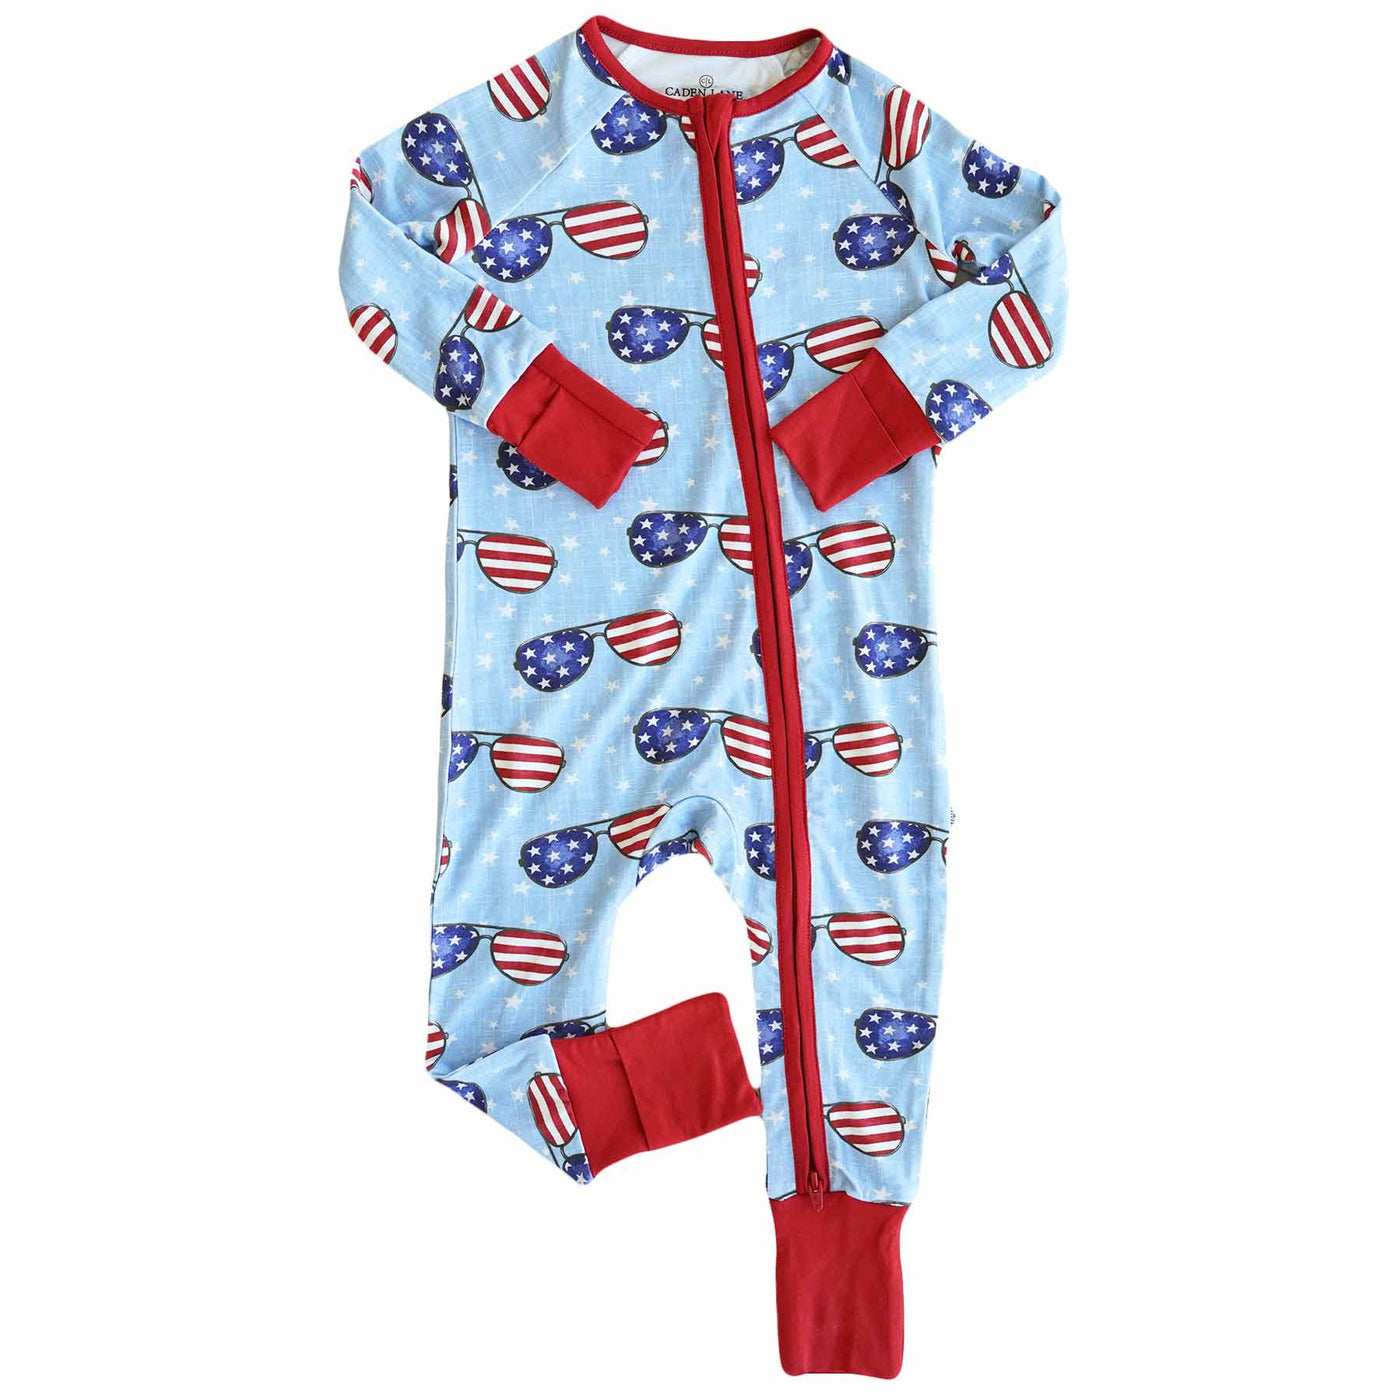 baby pajama romper with red, white and blue sunglasses for the 4th of july 